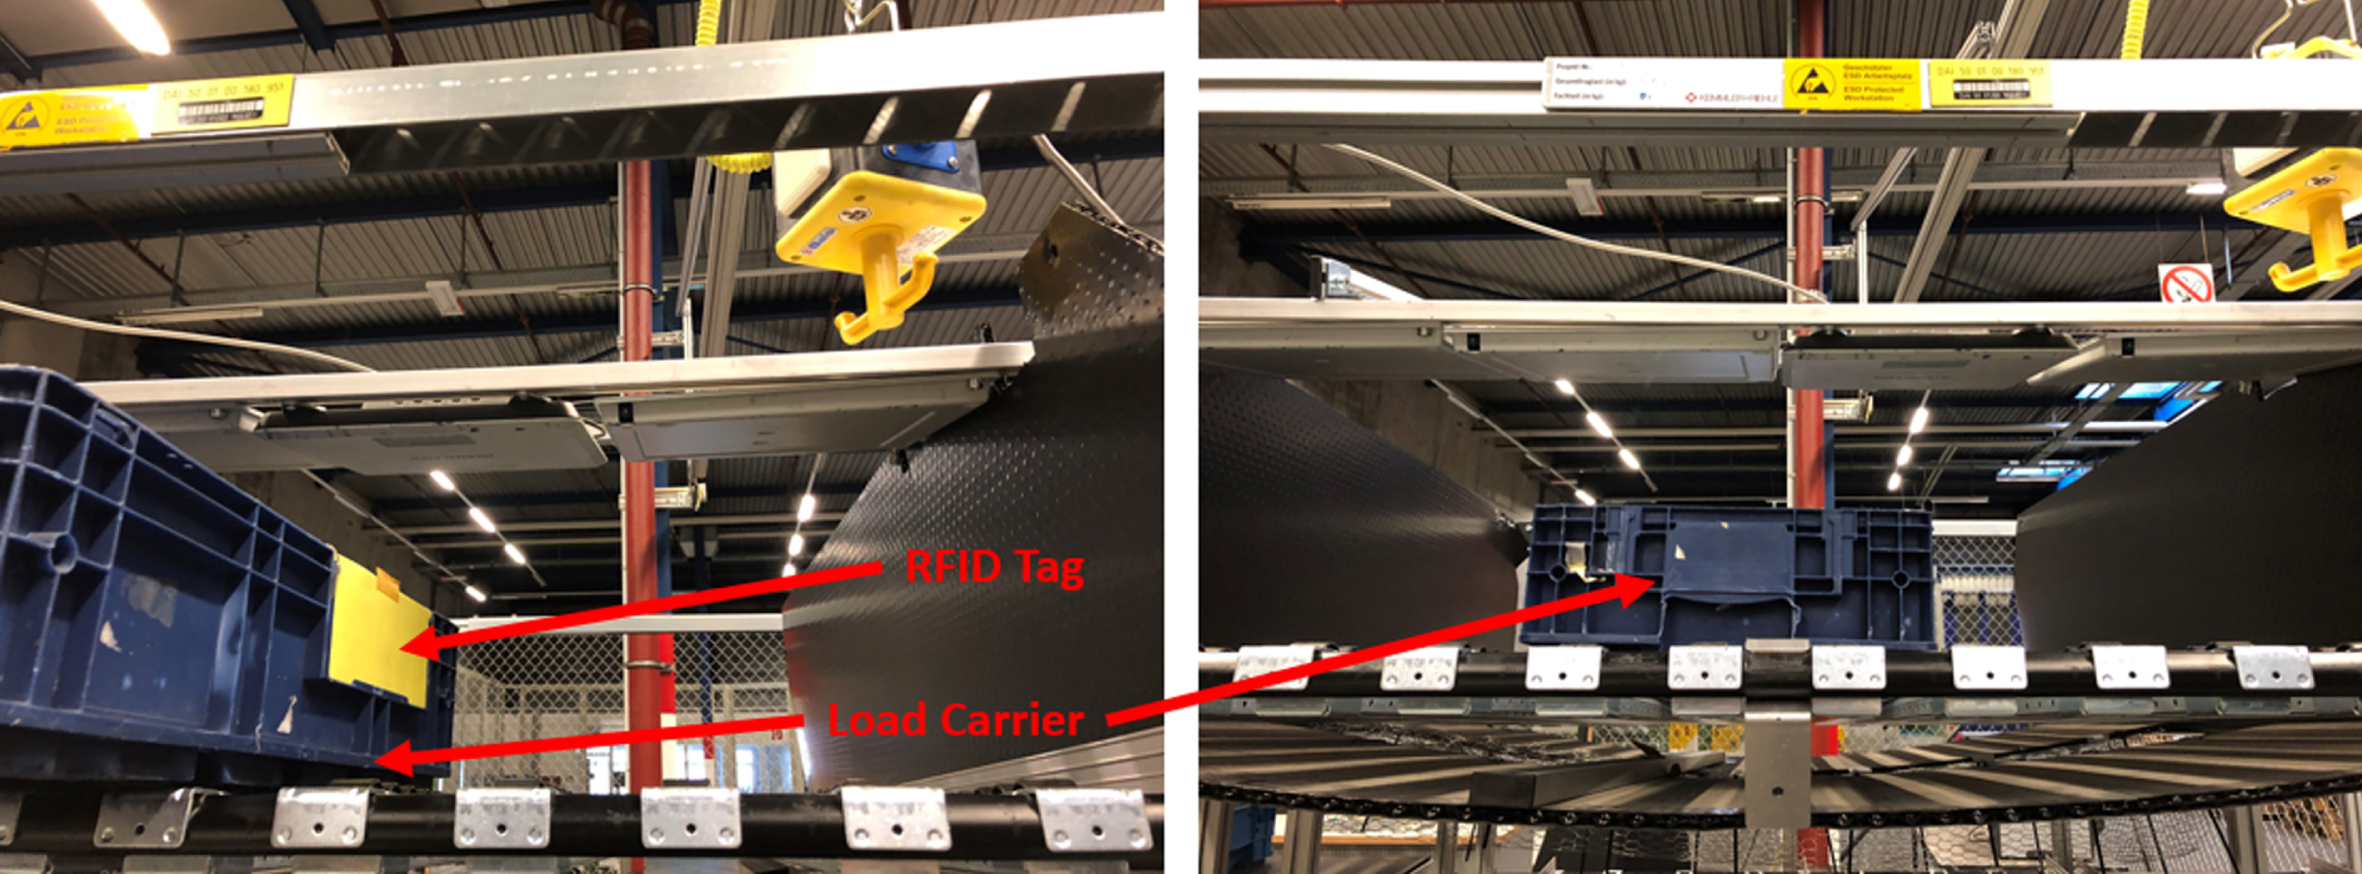 Process of how a load carrier is pushed into the shelf.